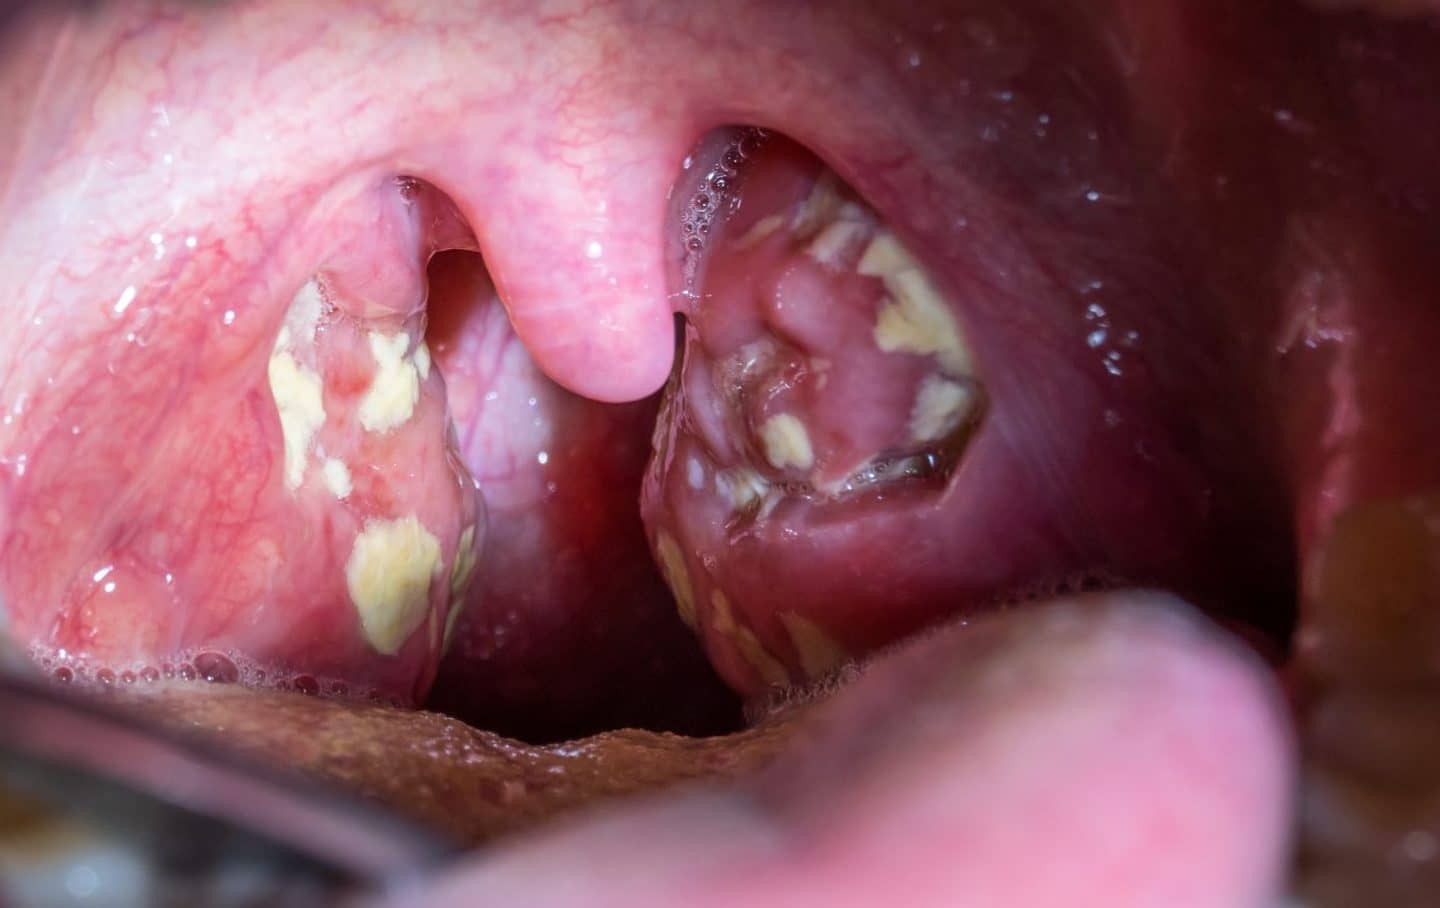 how to get rid of white spots on tonsils